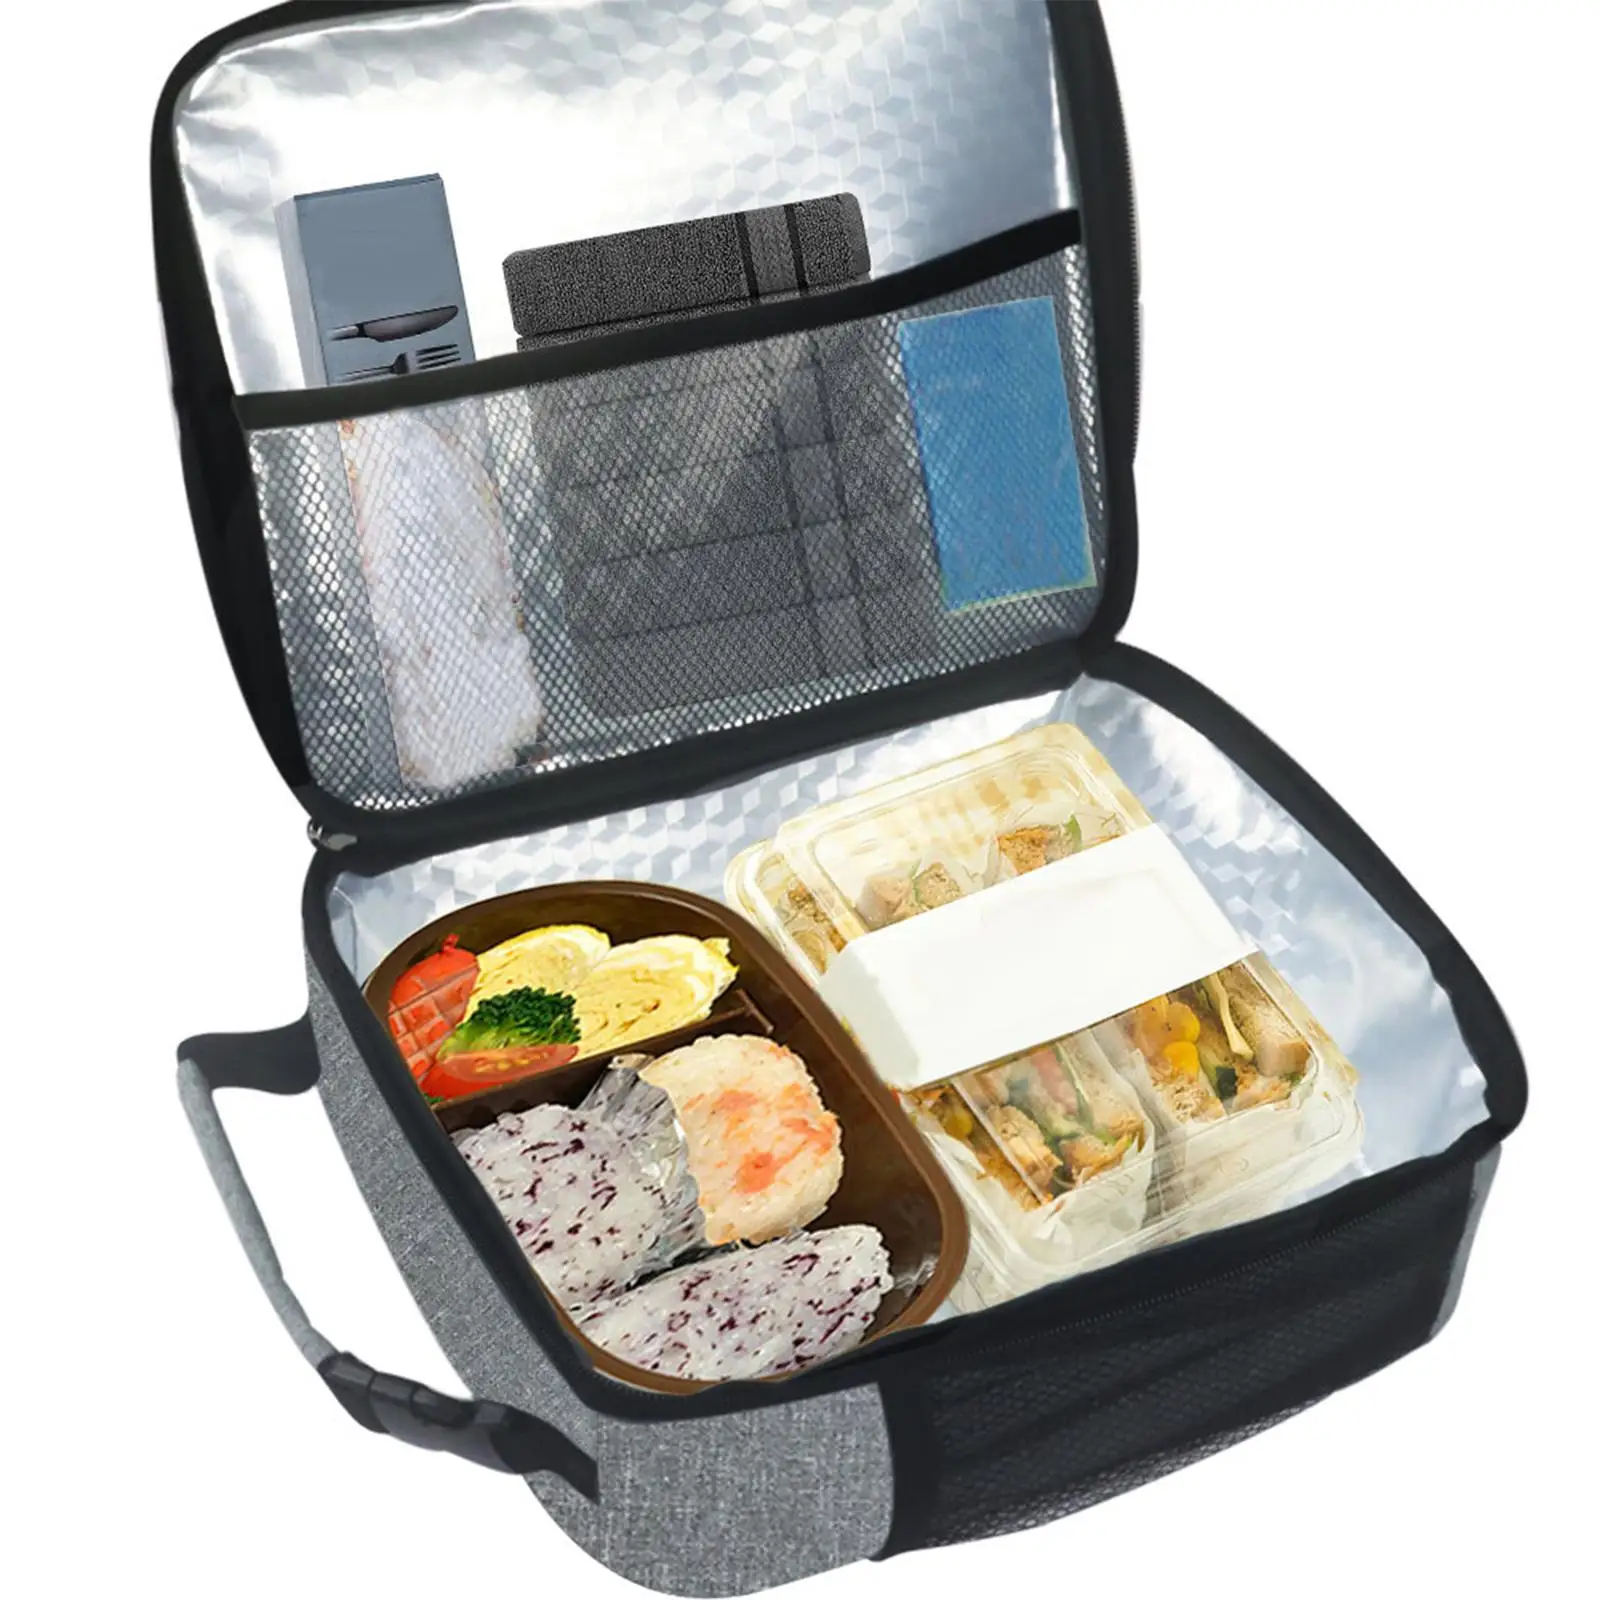 Portable Insulated  Mesh Pockets on Both  Lunch Container Waterproof Durable Bag for Outdoor BBQ Fishing Car Office